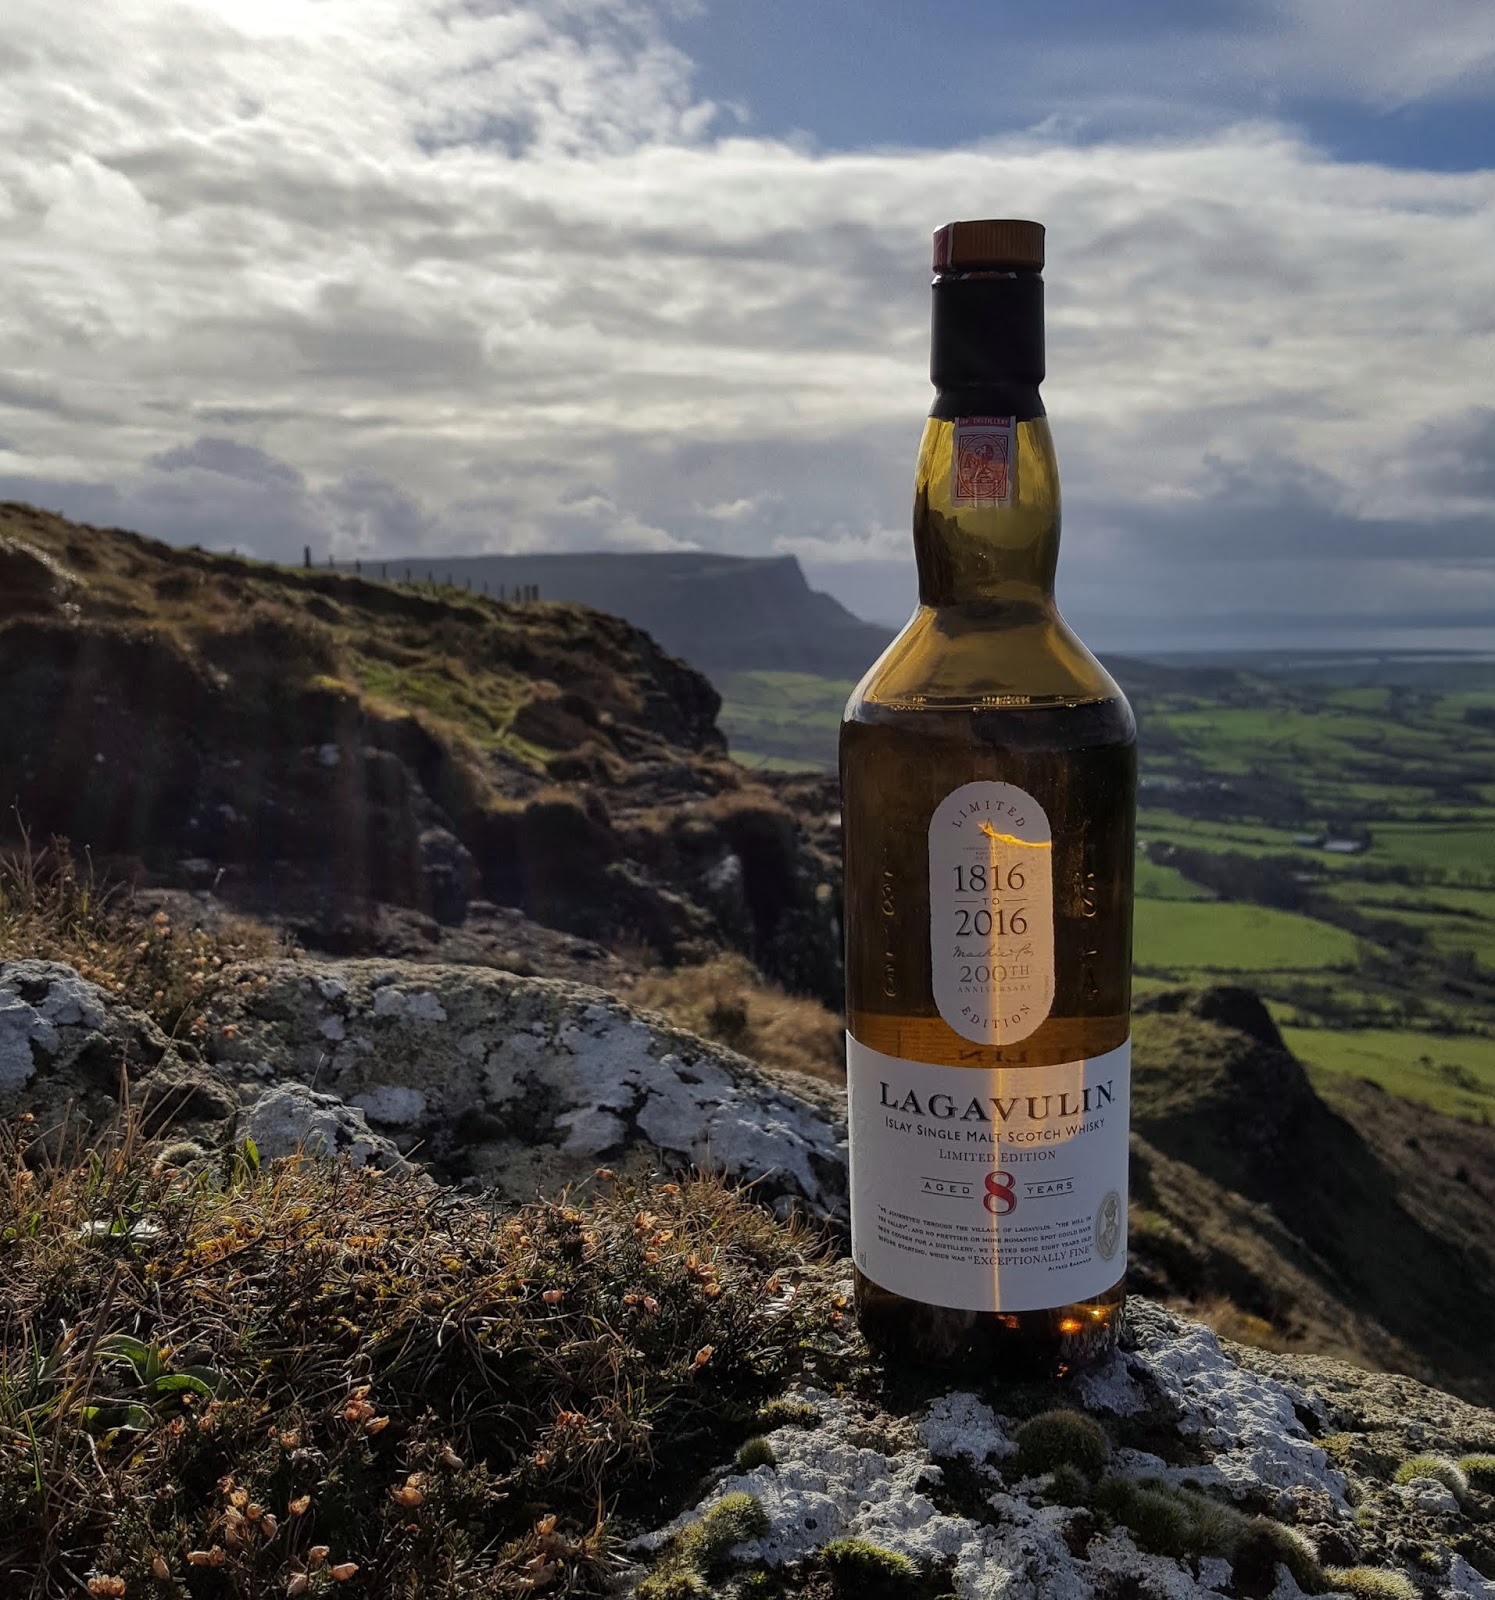 Review: Lagavulin 16 Year Old